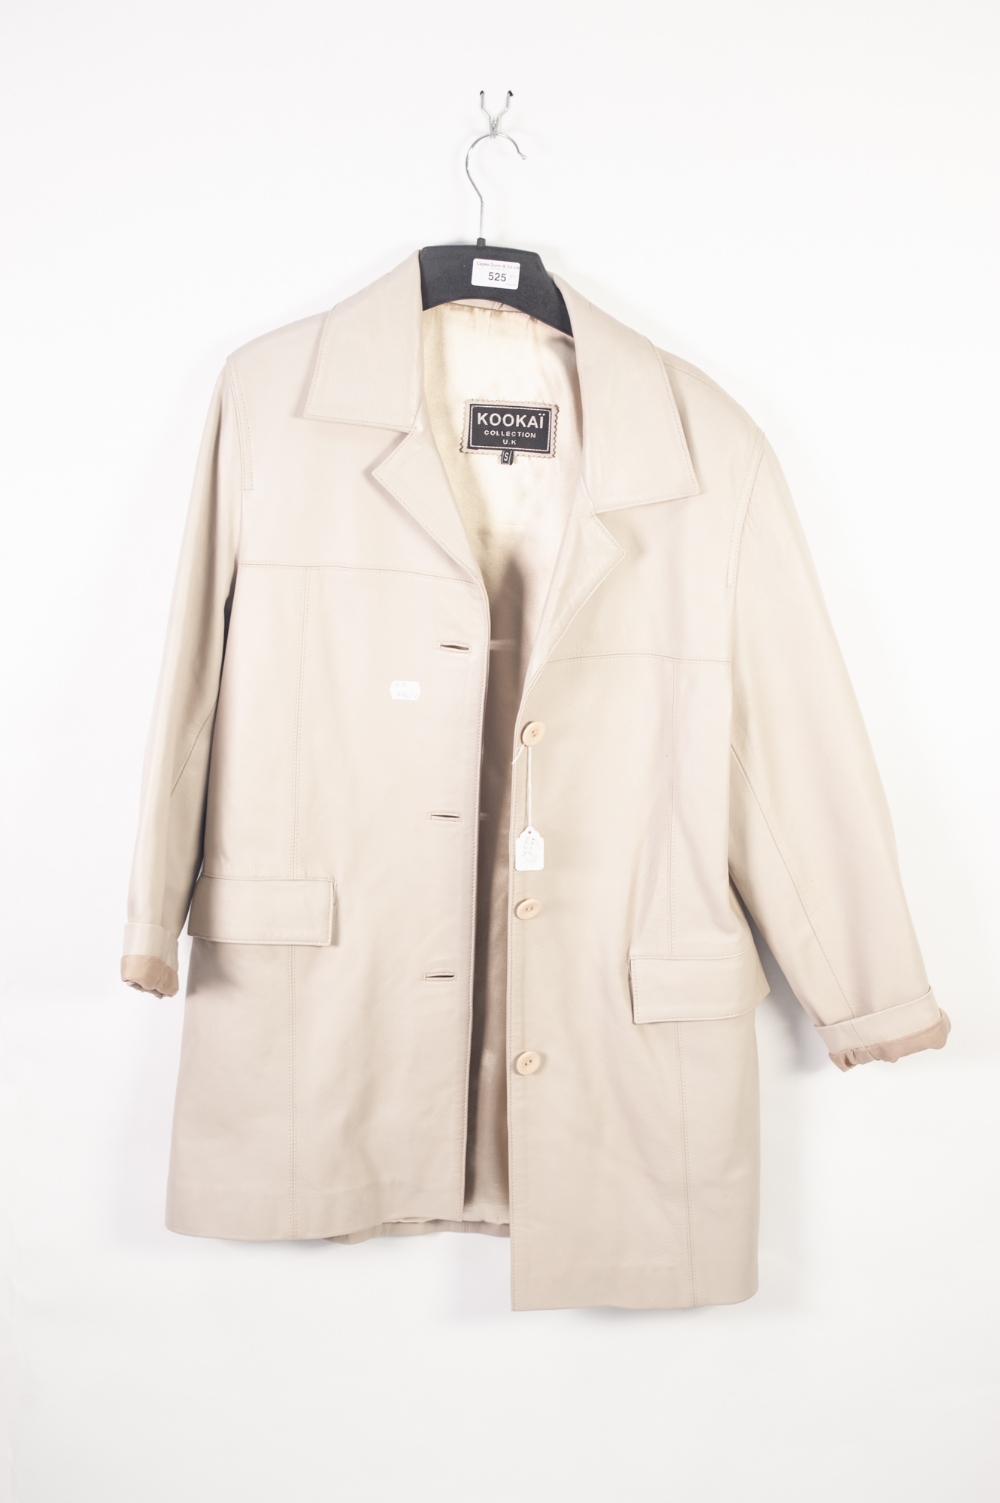 LADY'S 'KOOKAI', ENGLAND PALE GREY SOFT LEATHER 3/4 LENGTH COAT (small size) and a LADY'S RAMPEL,